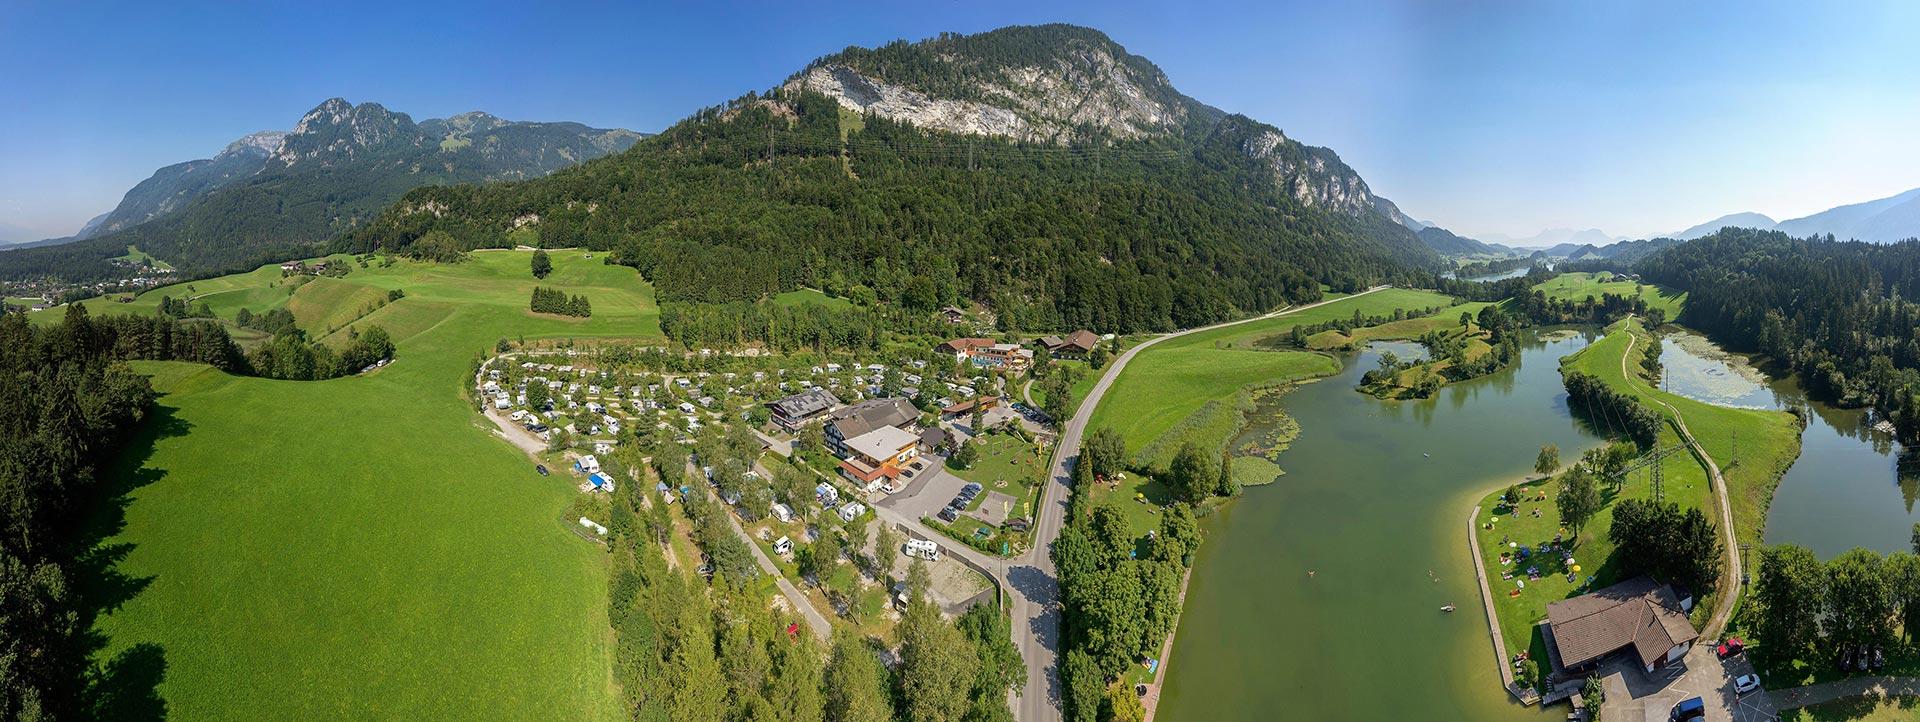 Camping Stadlerhof - a holiday with the Sappl family at the foot of the Alps – image 4